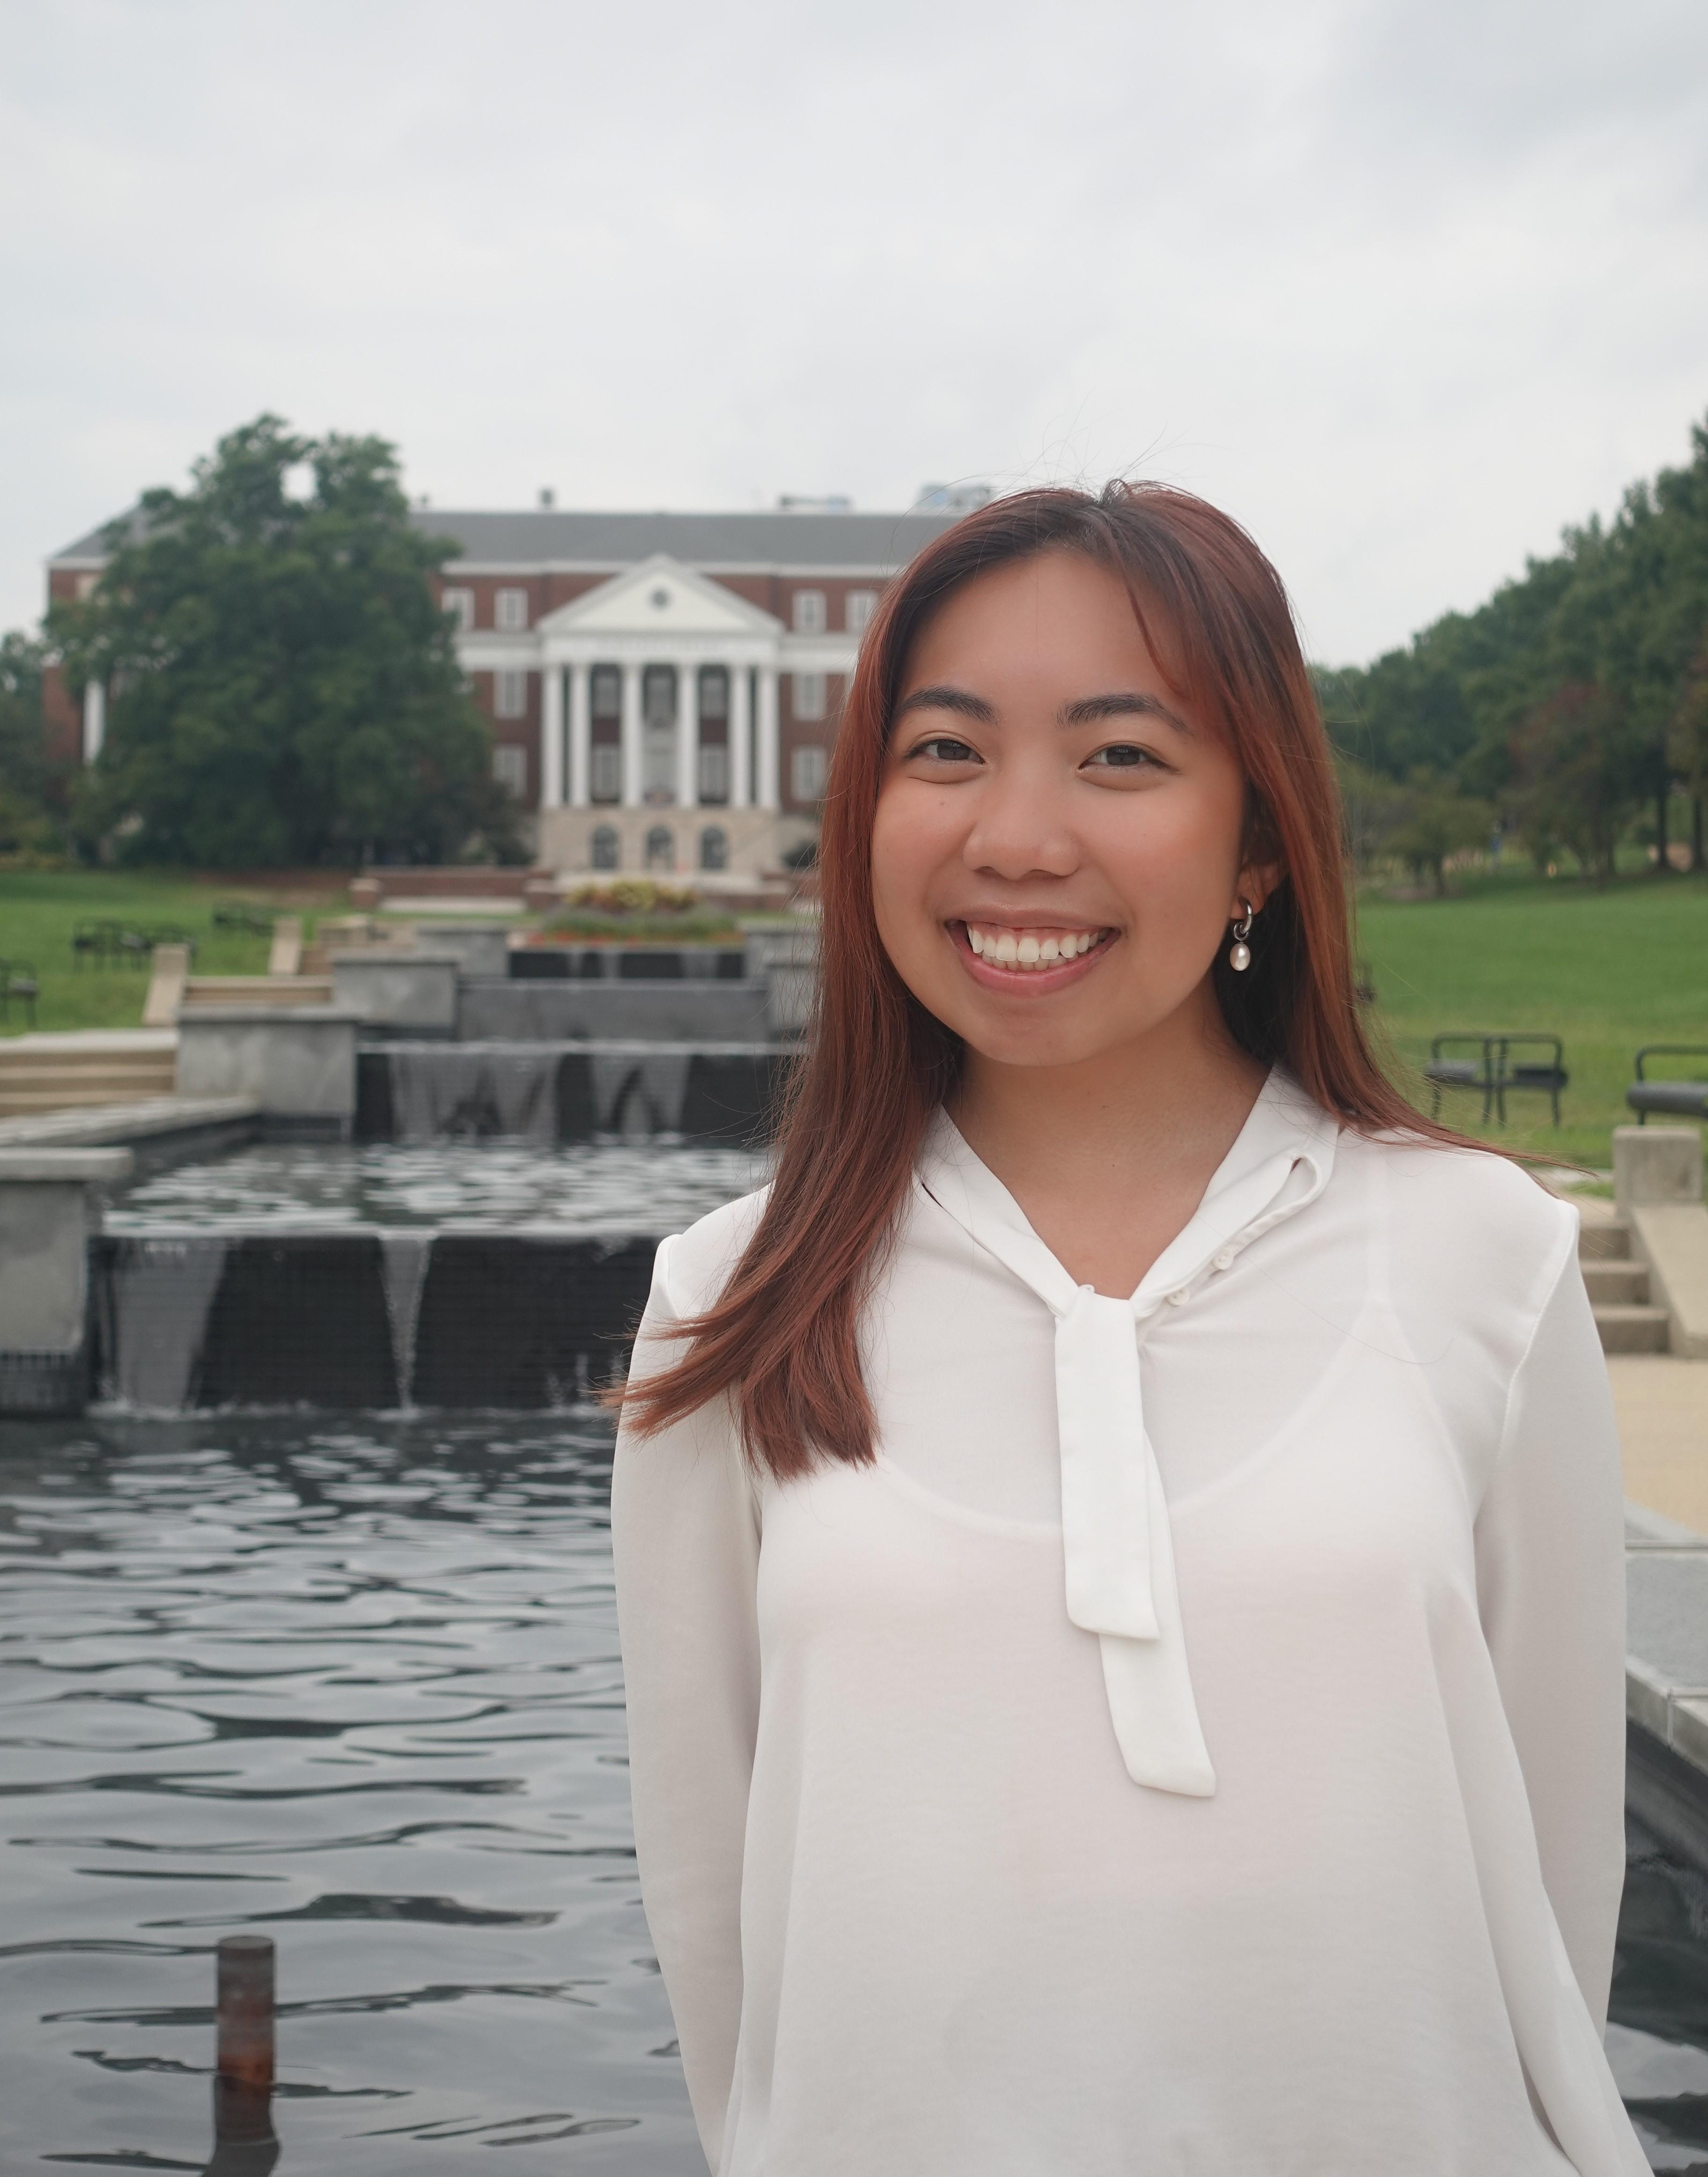 Photo of Lei Danielle Escobal at the ODK Fountain